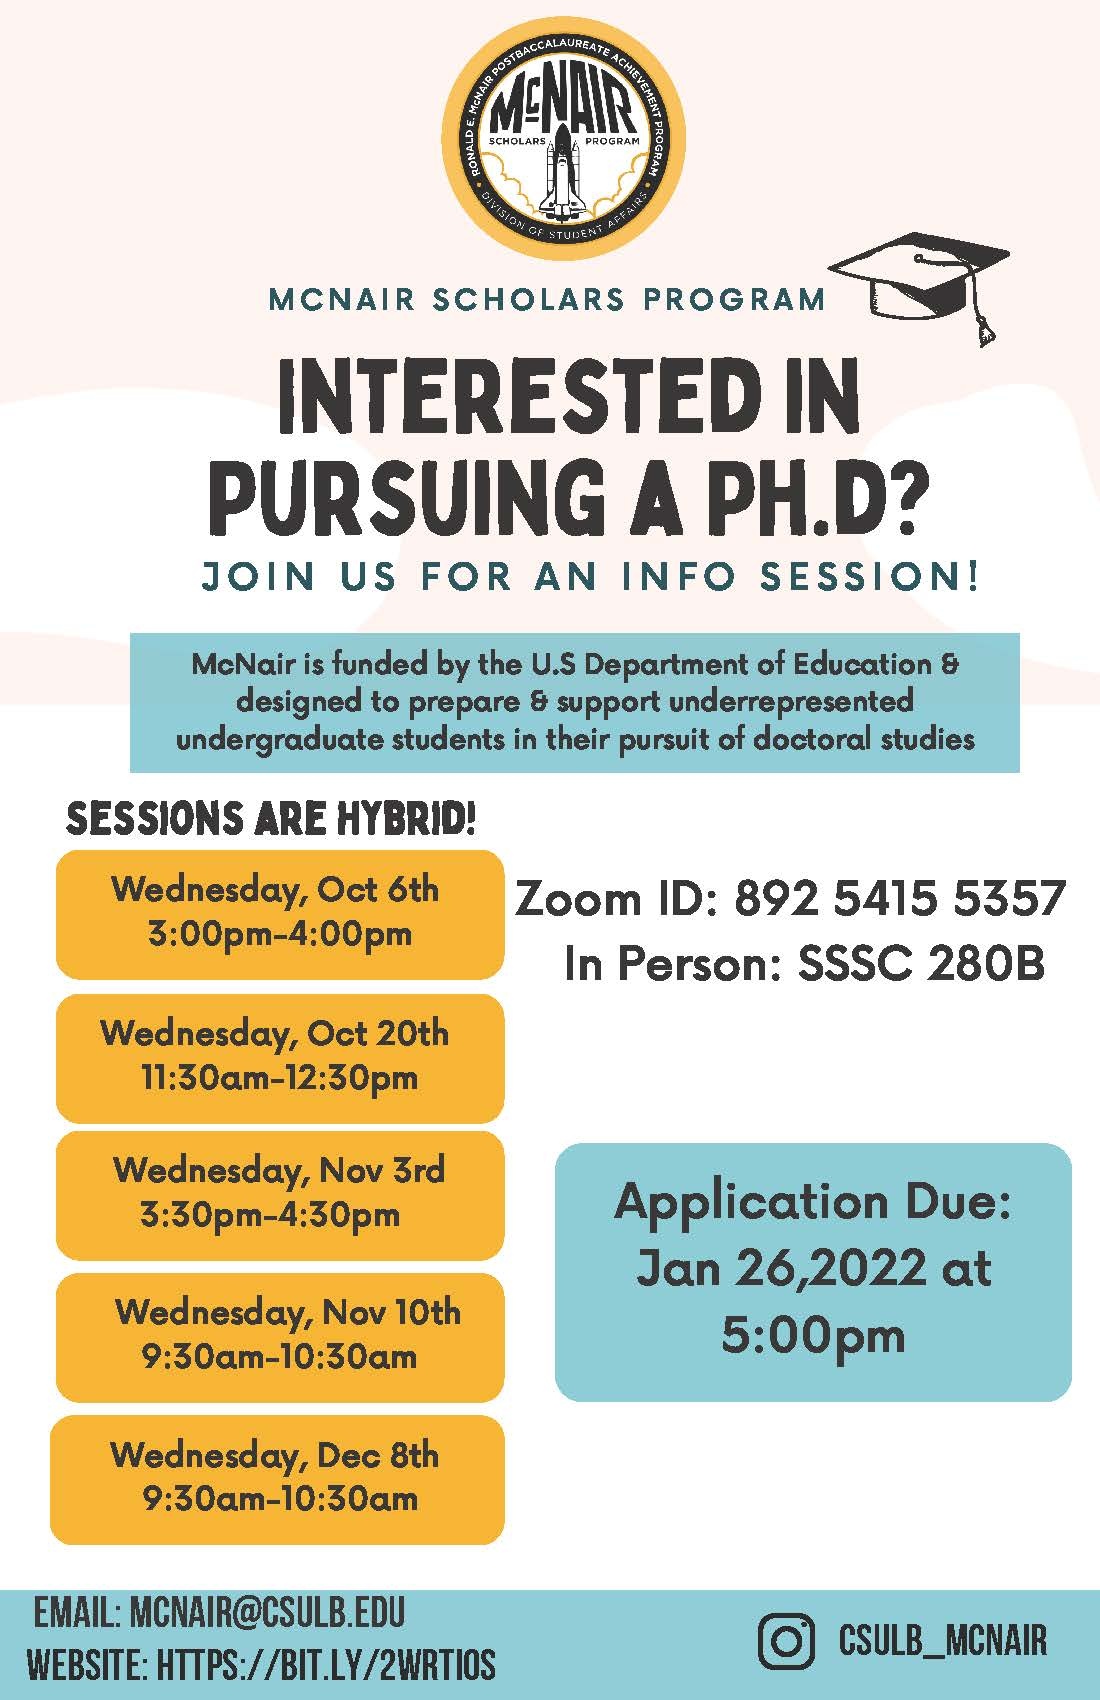 info session